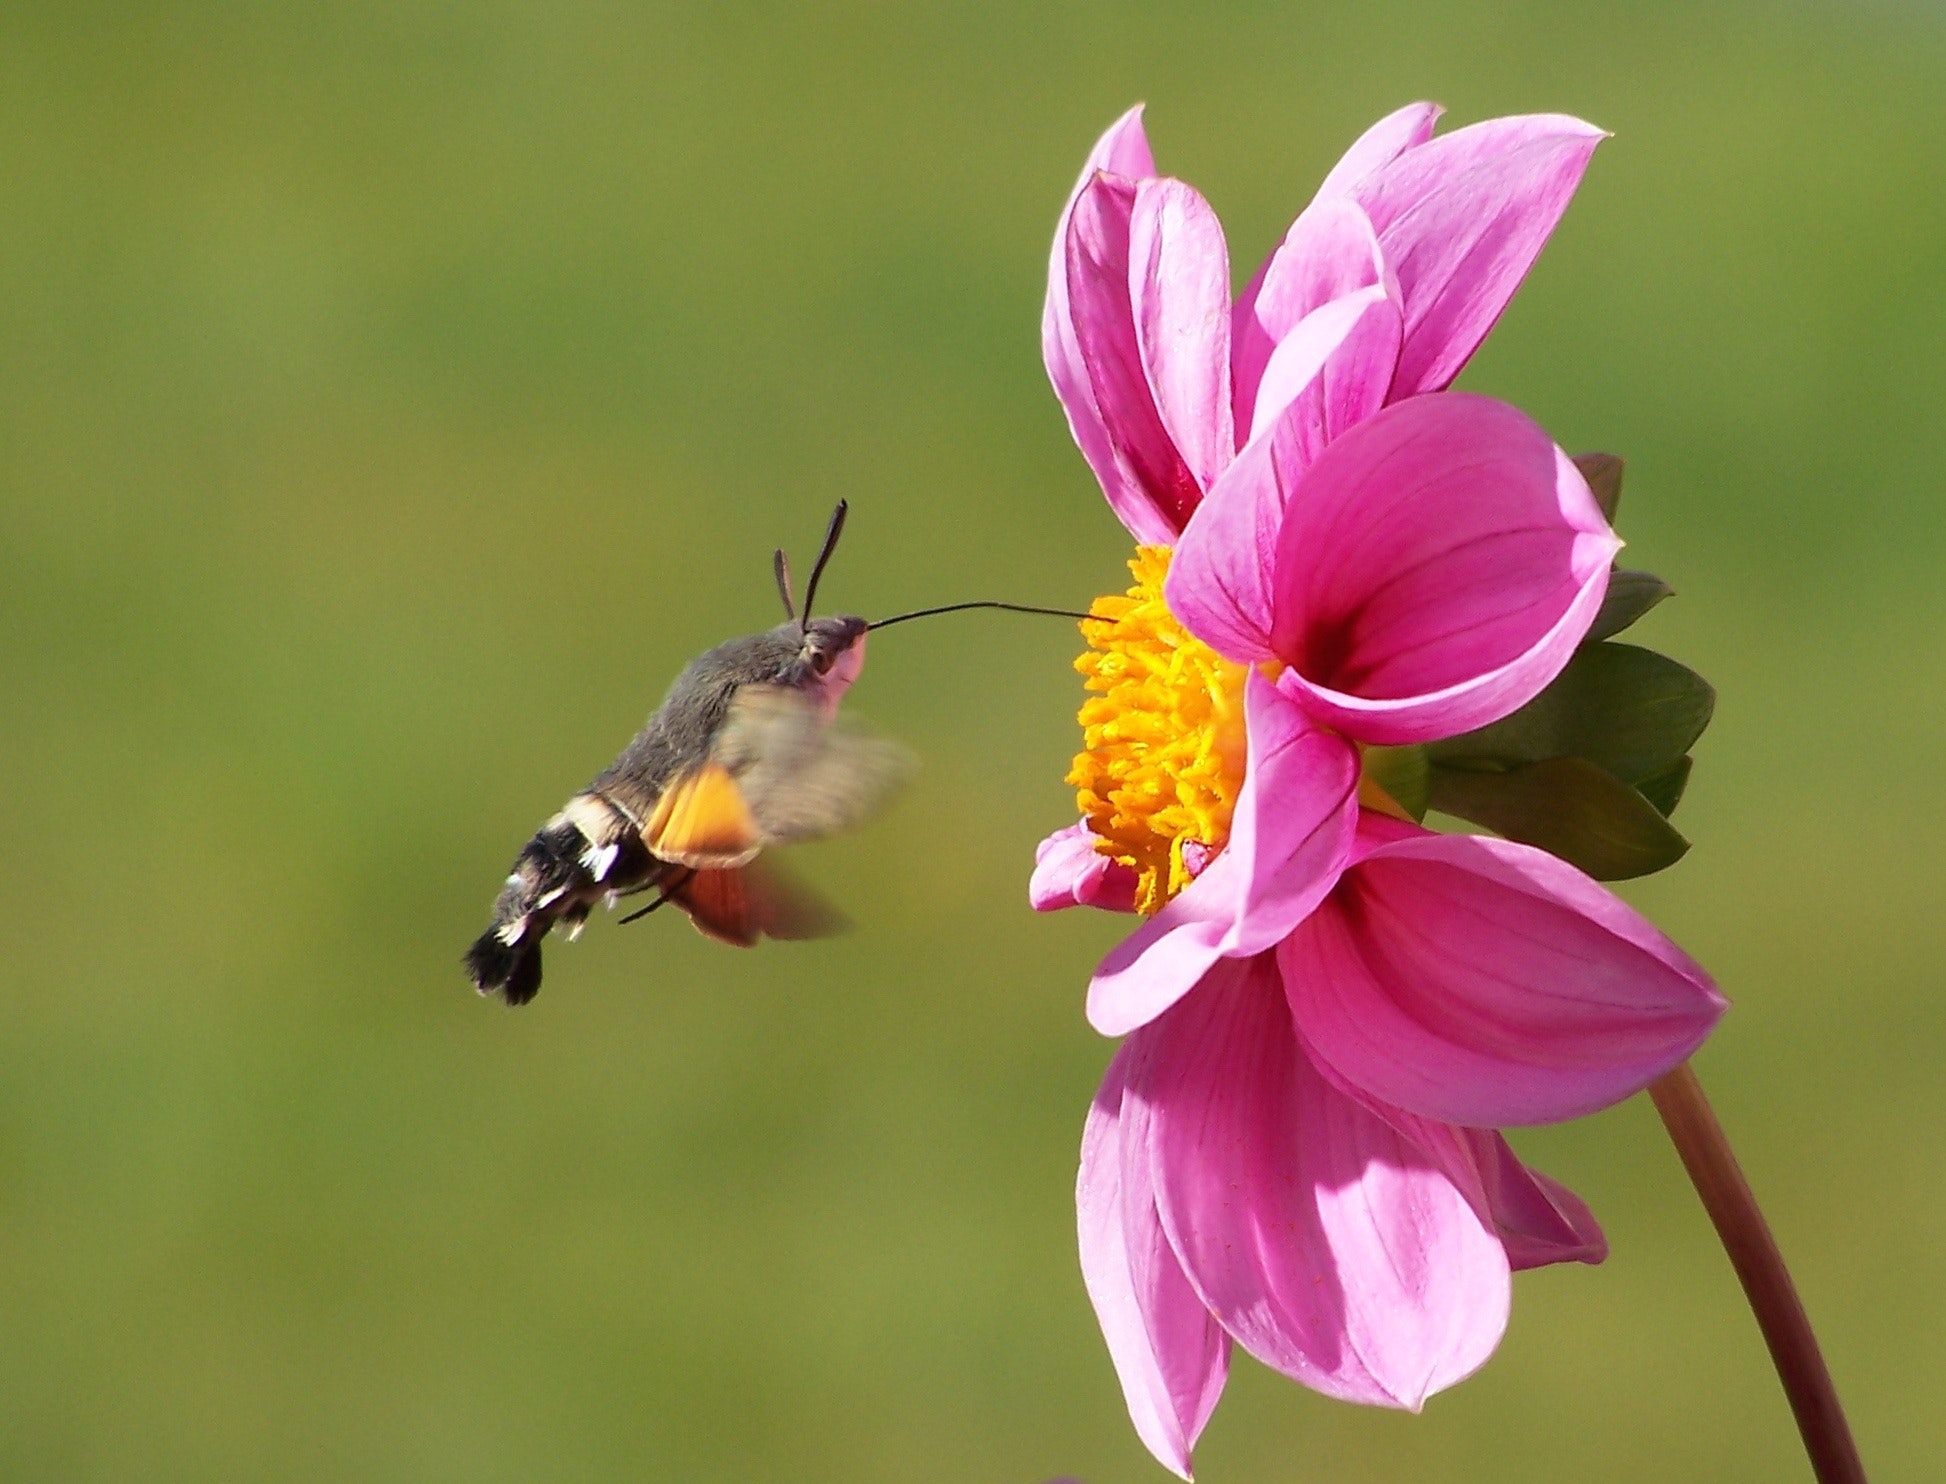 Moth hovering by a pink zinnia photo